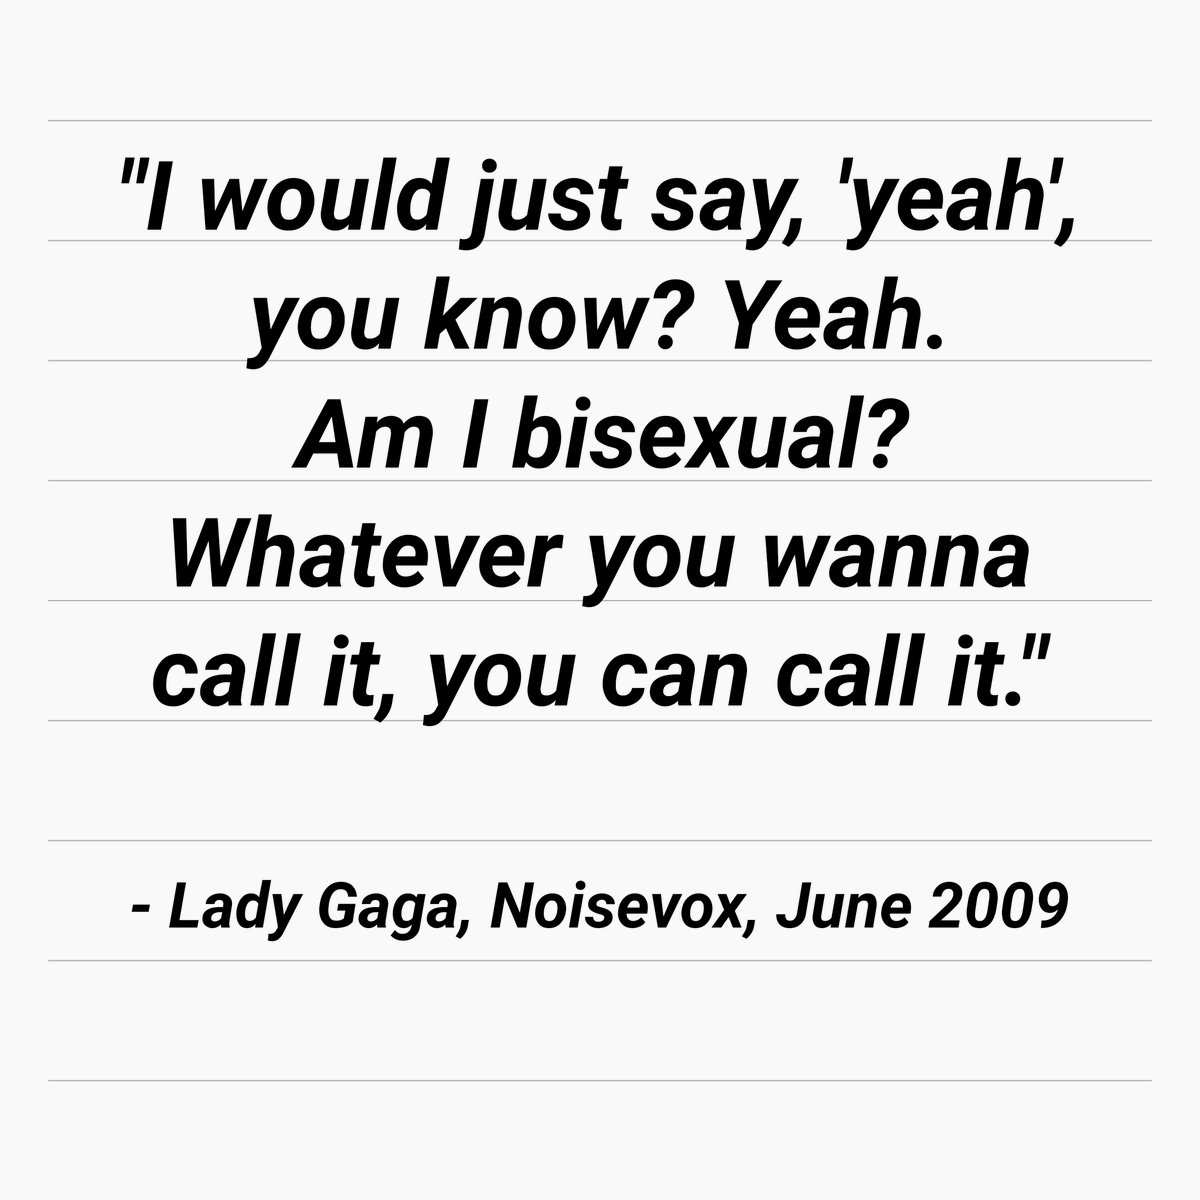 in interviews:• at the beginning she was often pressured to pick a label before she herself started identifying as bisexual• despite her saying she doesn't consider sexual orientation, interviewers asked her if she was bisexual upon learning about her attraction to women